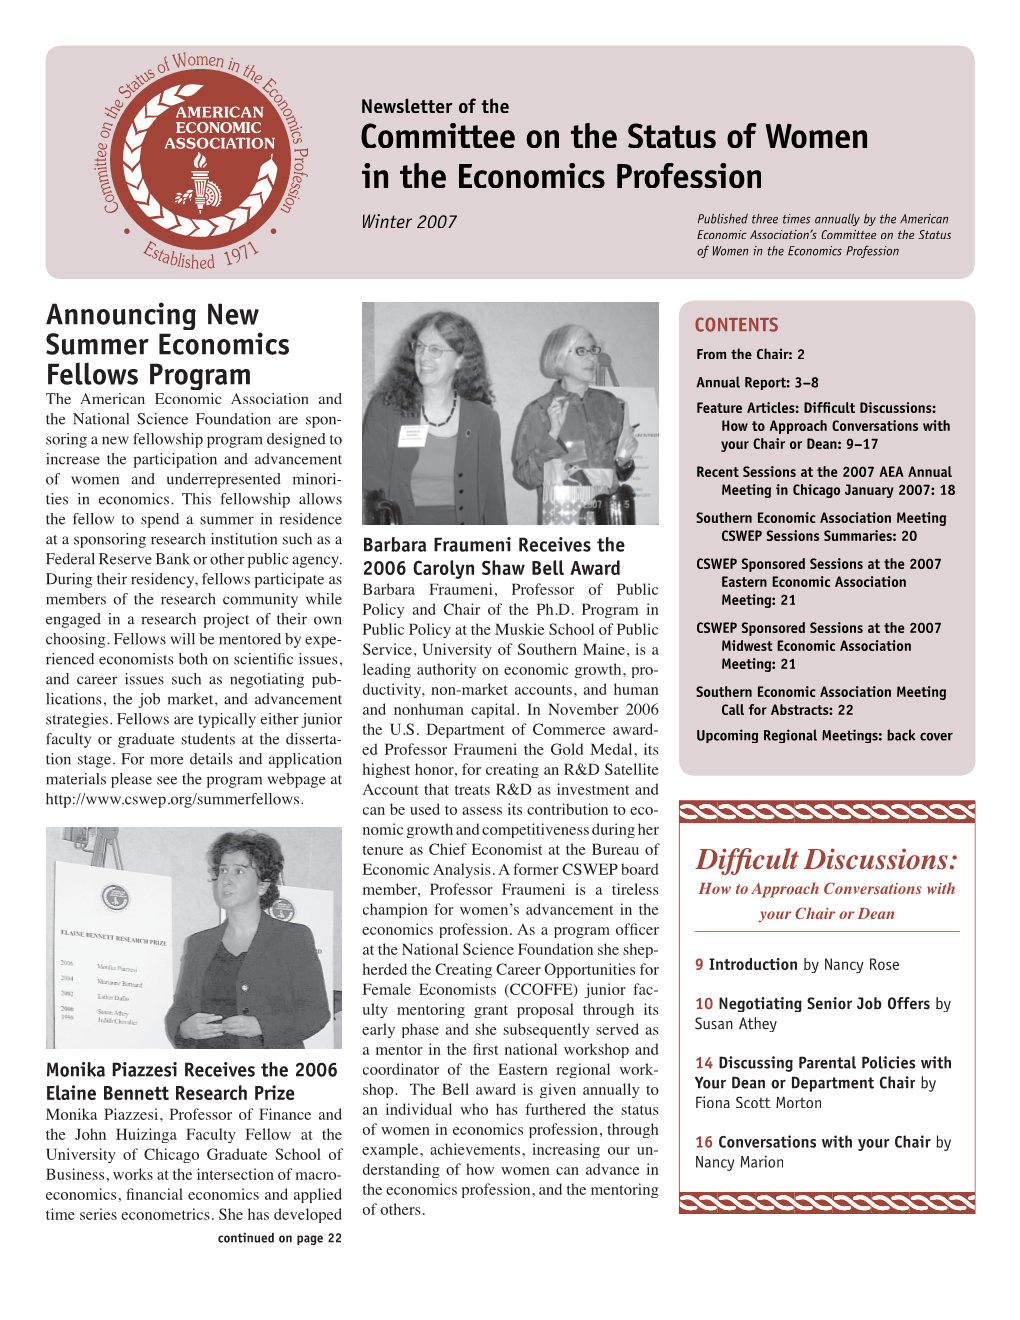 Committee on the Status of Women in the Economics Profession